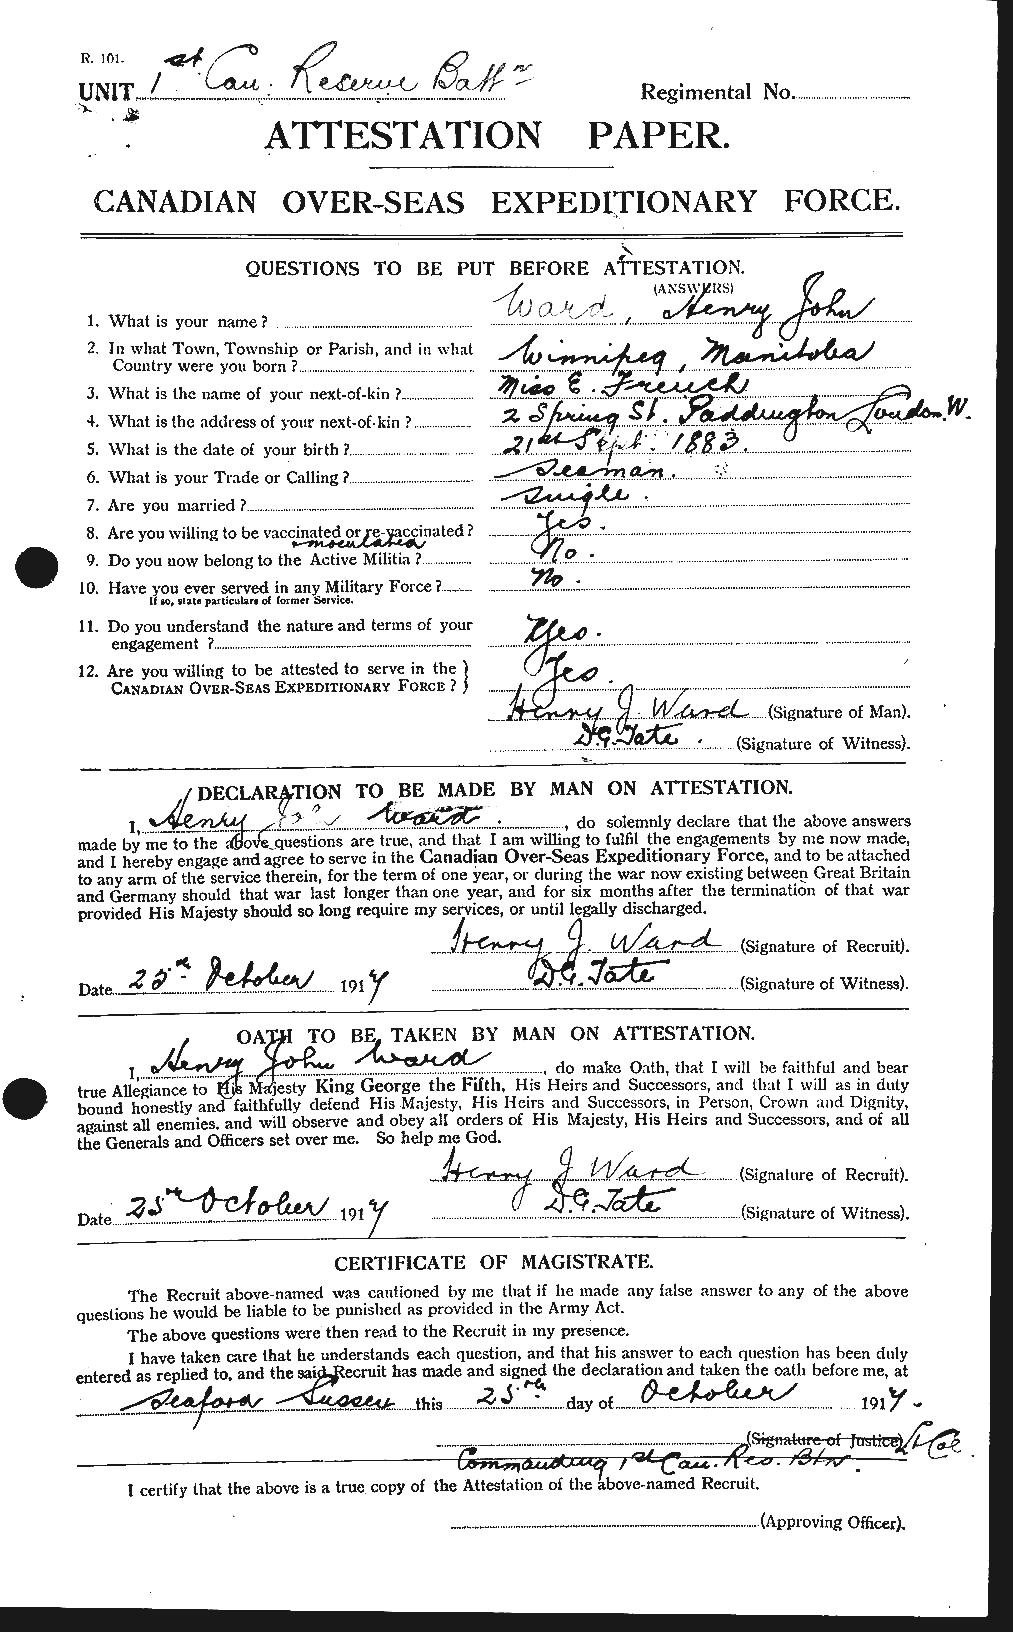 Personnel Records of the First World War - CEF 657841a